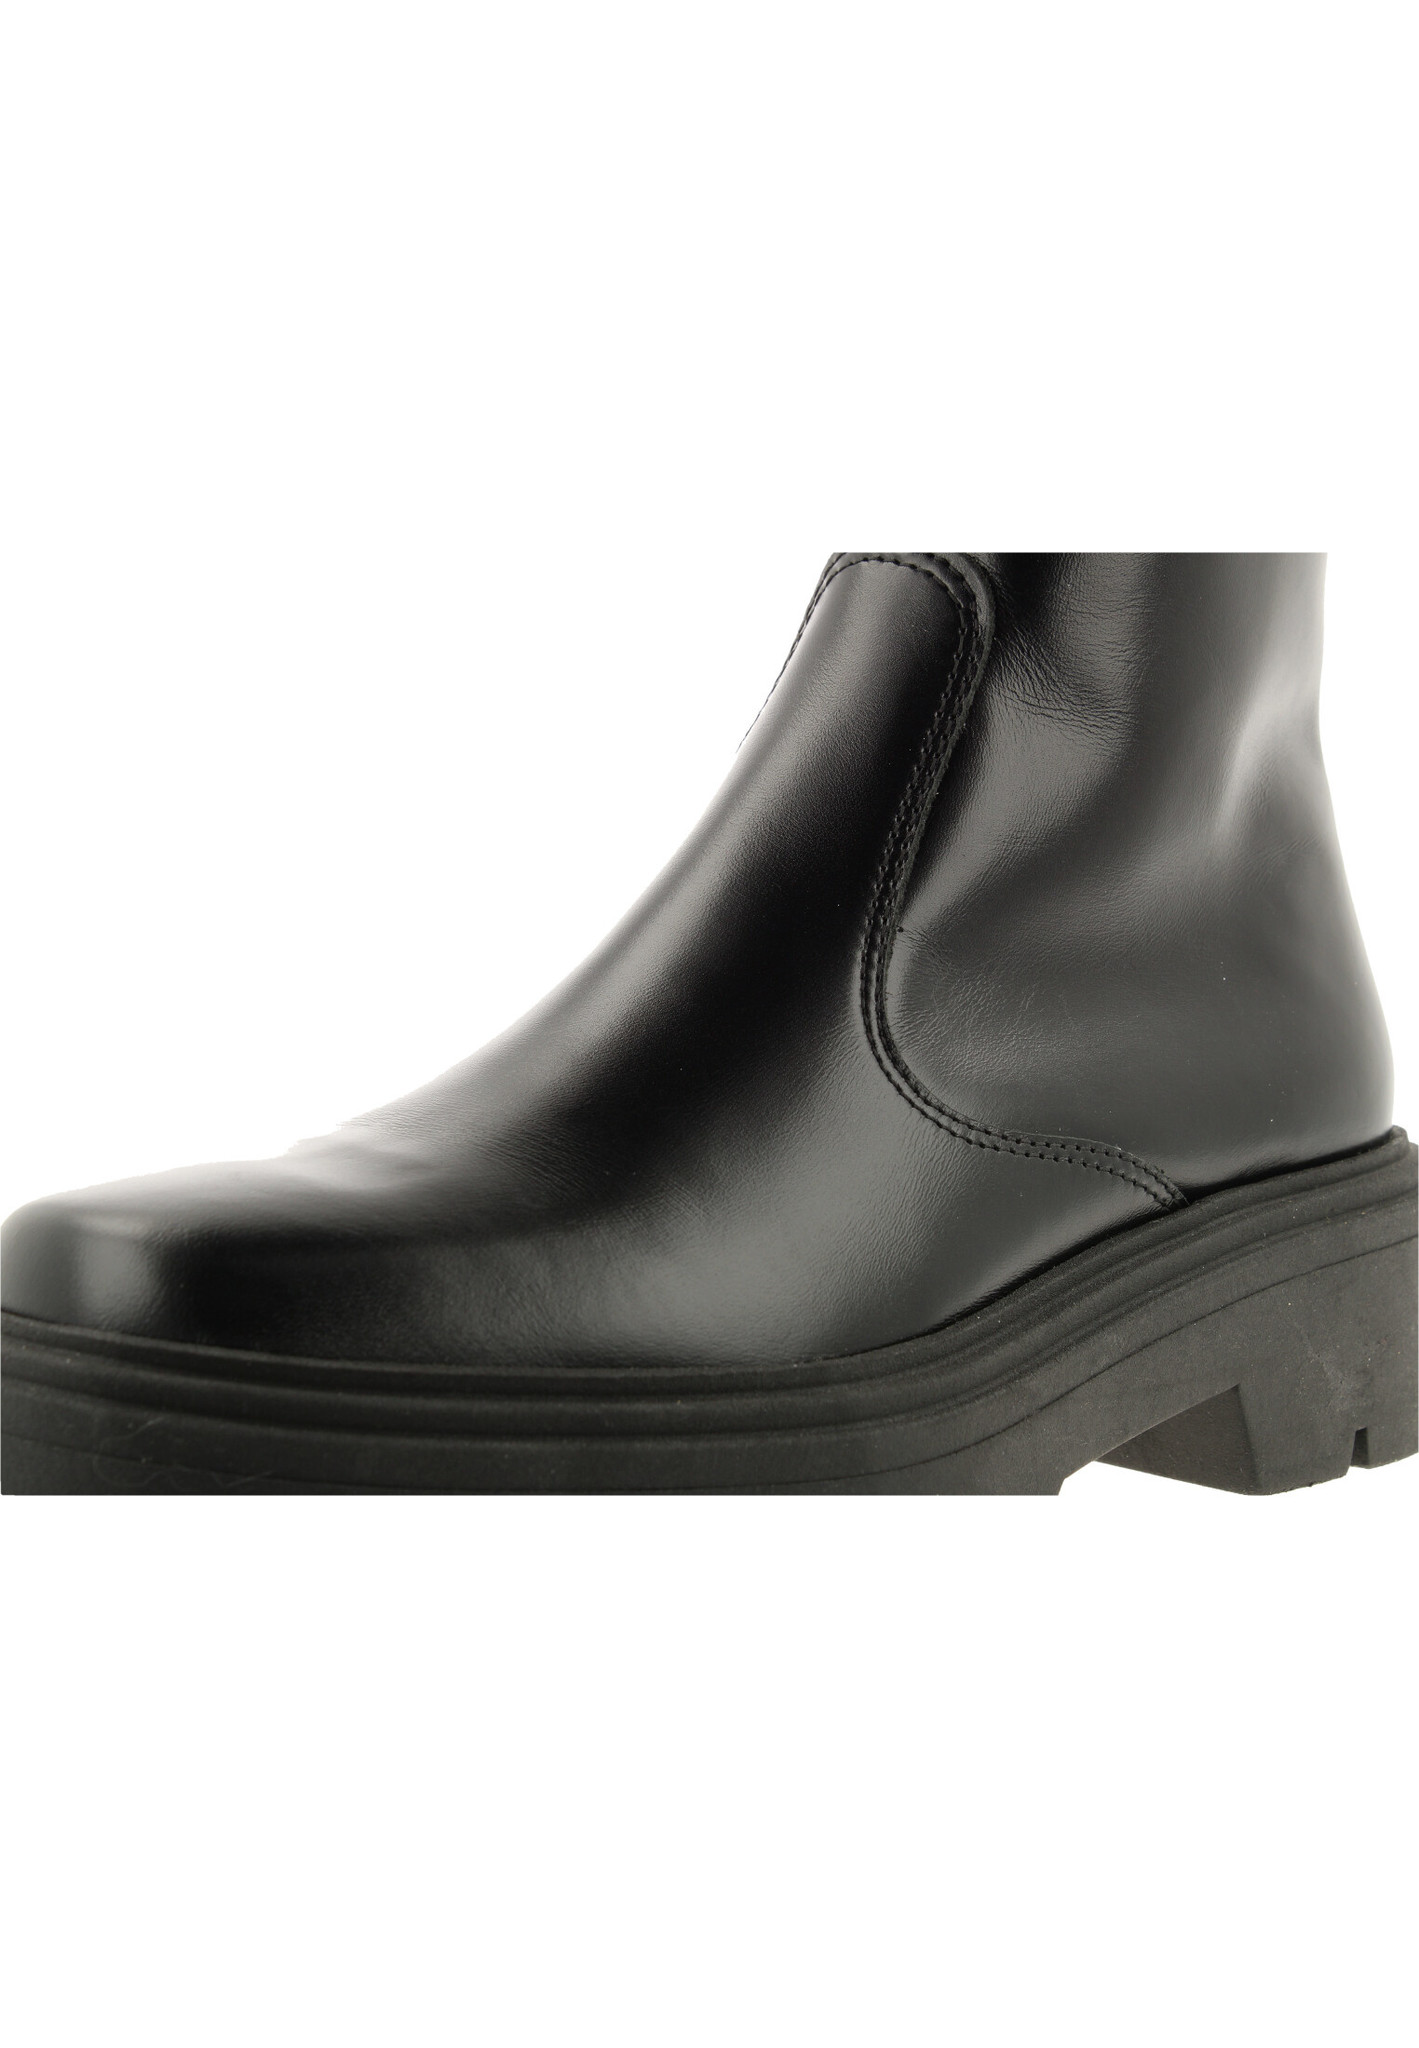 Walden Black Ankle Boots for Men - Fall/Winter collection - Camper USA